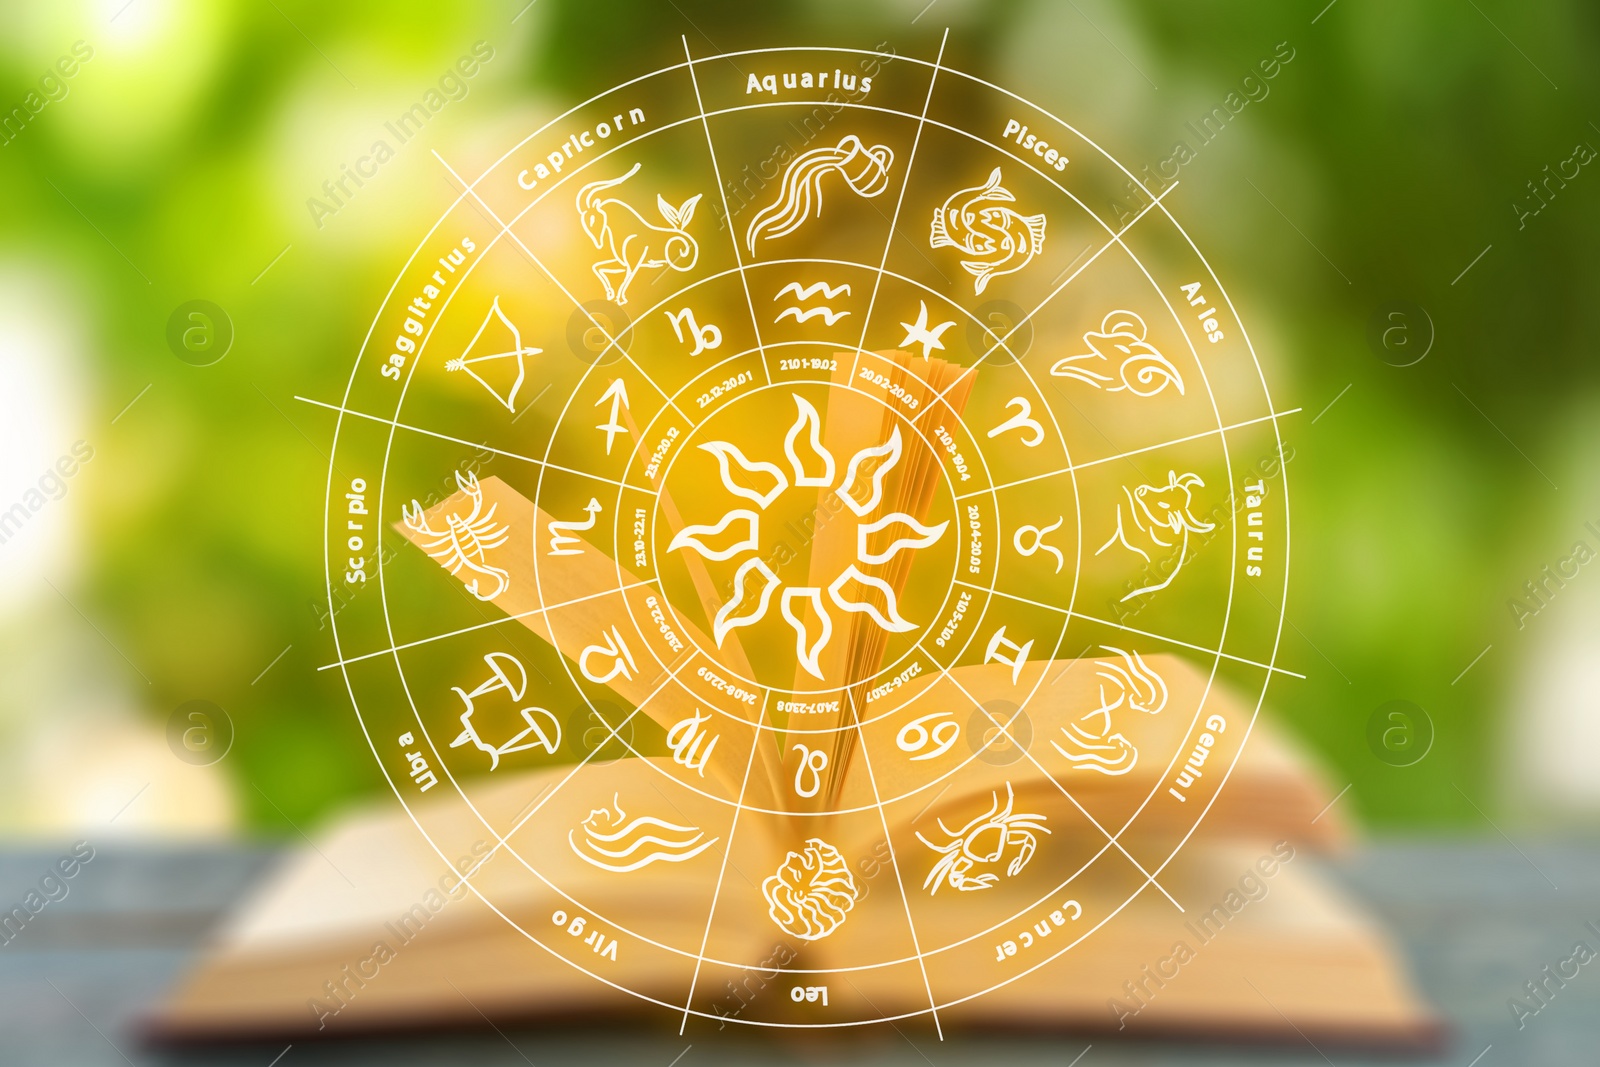 Image of Open book on table and illustration of zodiac wheel with astrological signs against blurred green background